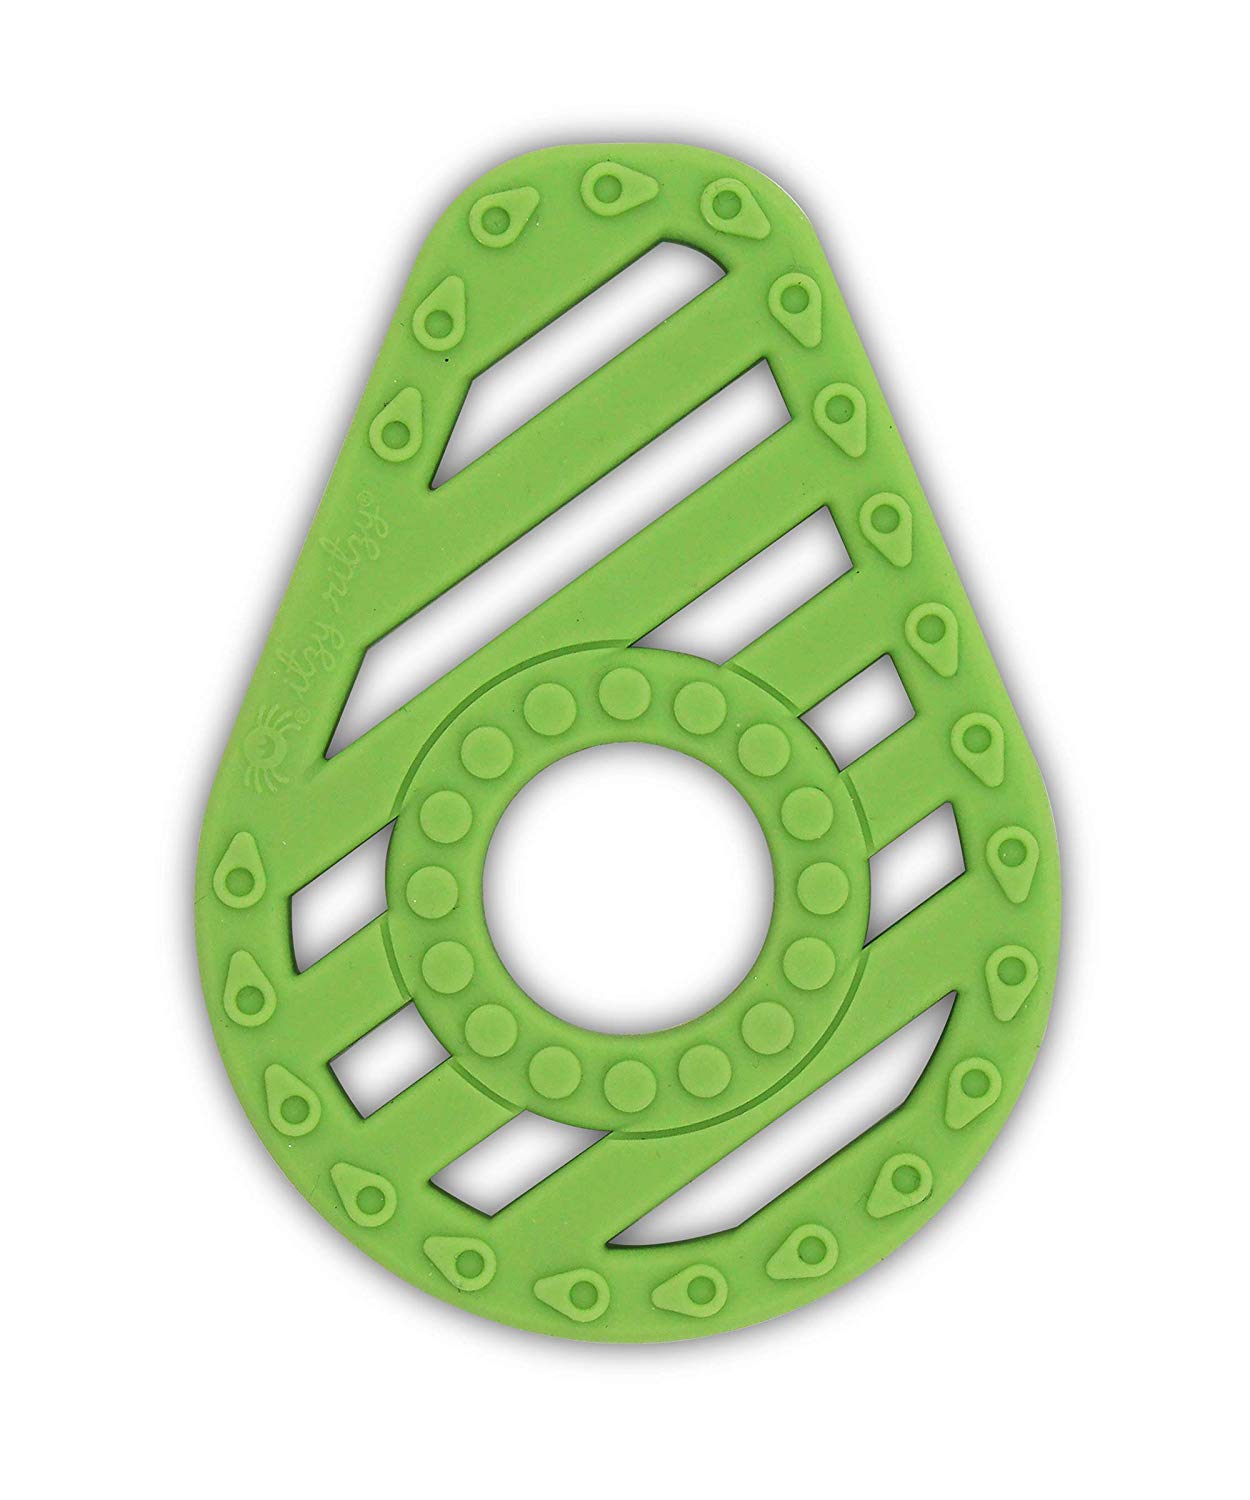 Itzy Ritzy Silicone Teether